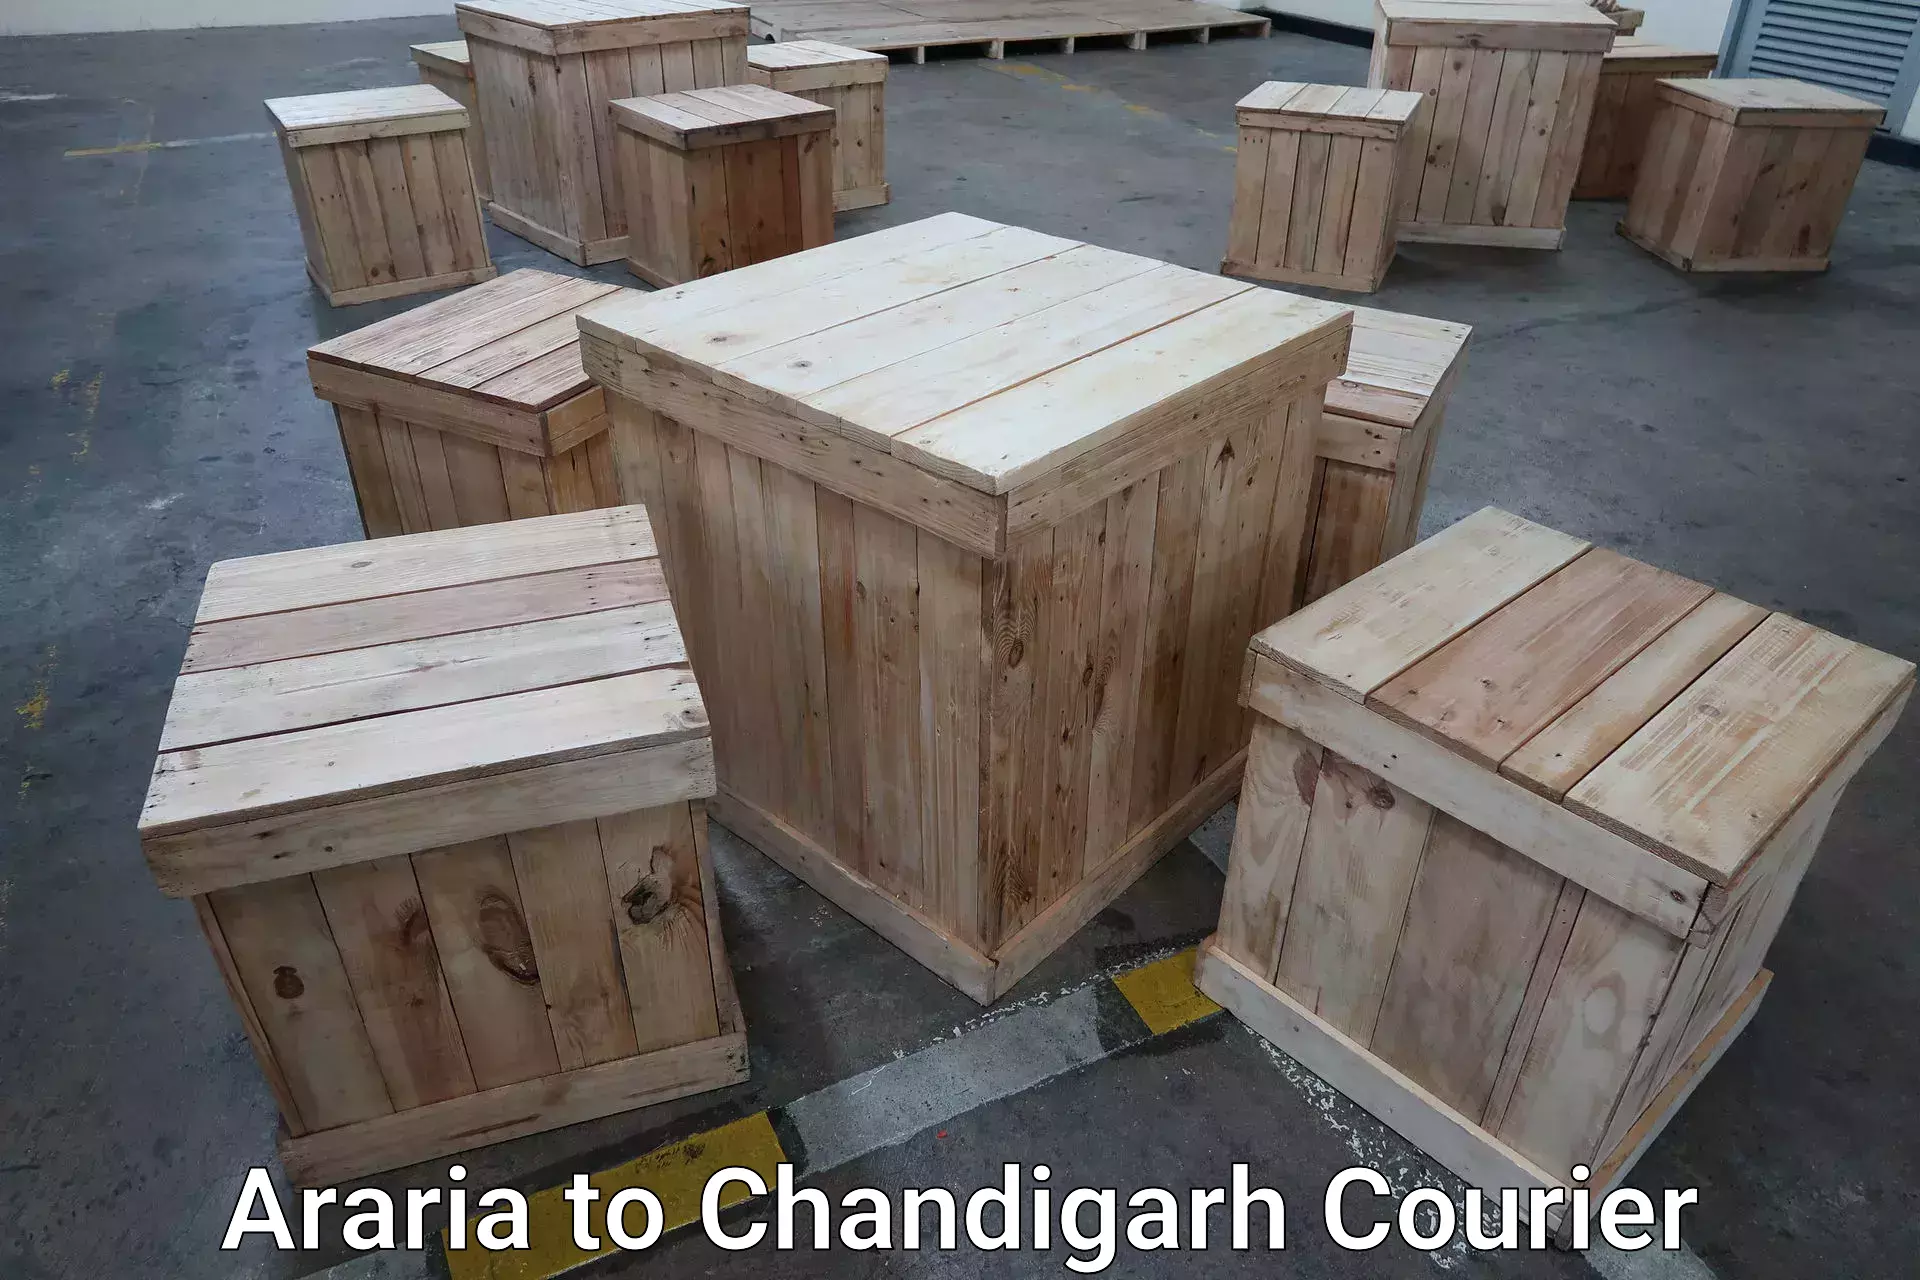 Luggage shipping planner Araria to Chandigarh